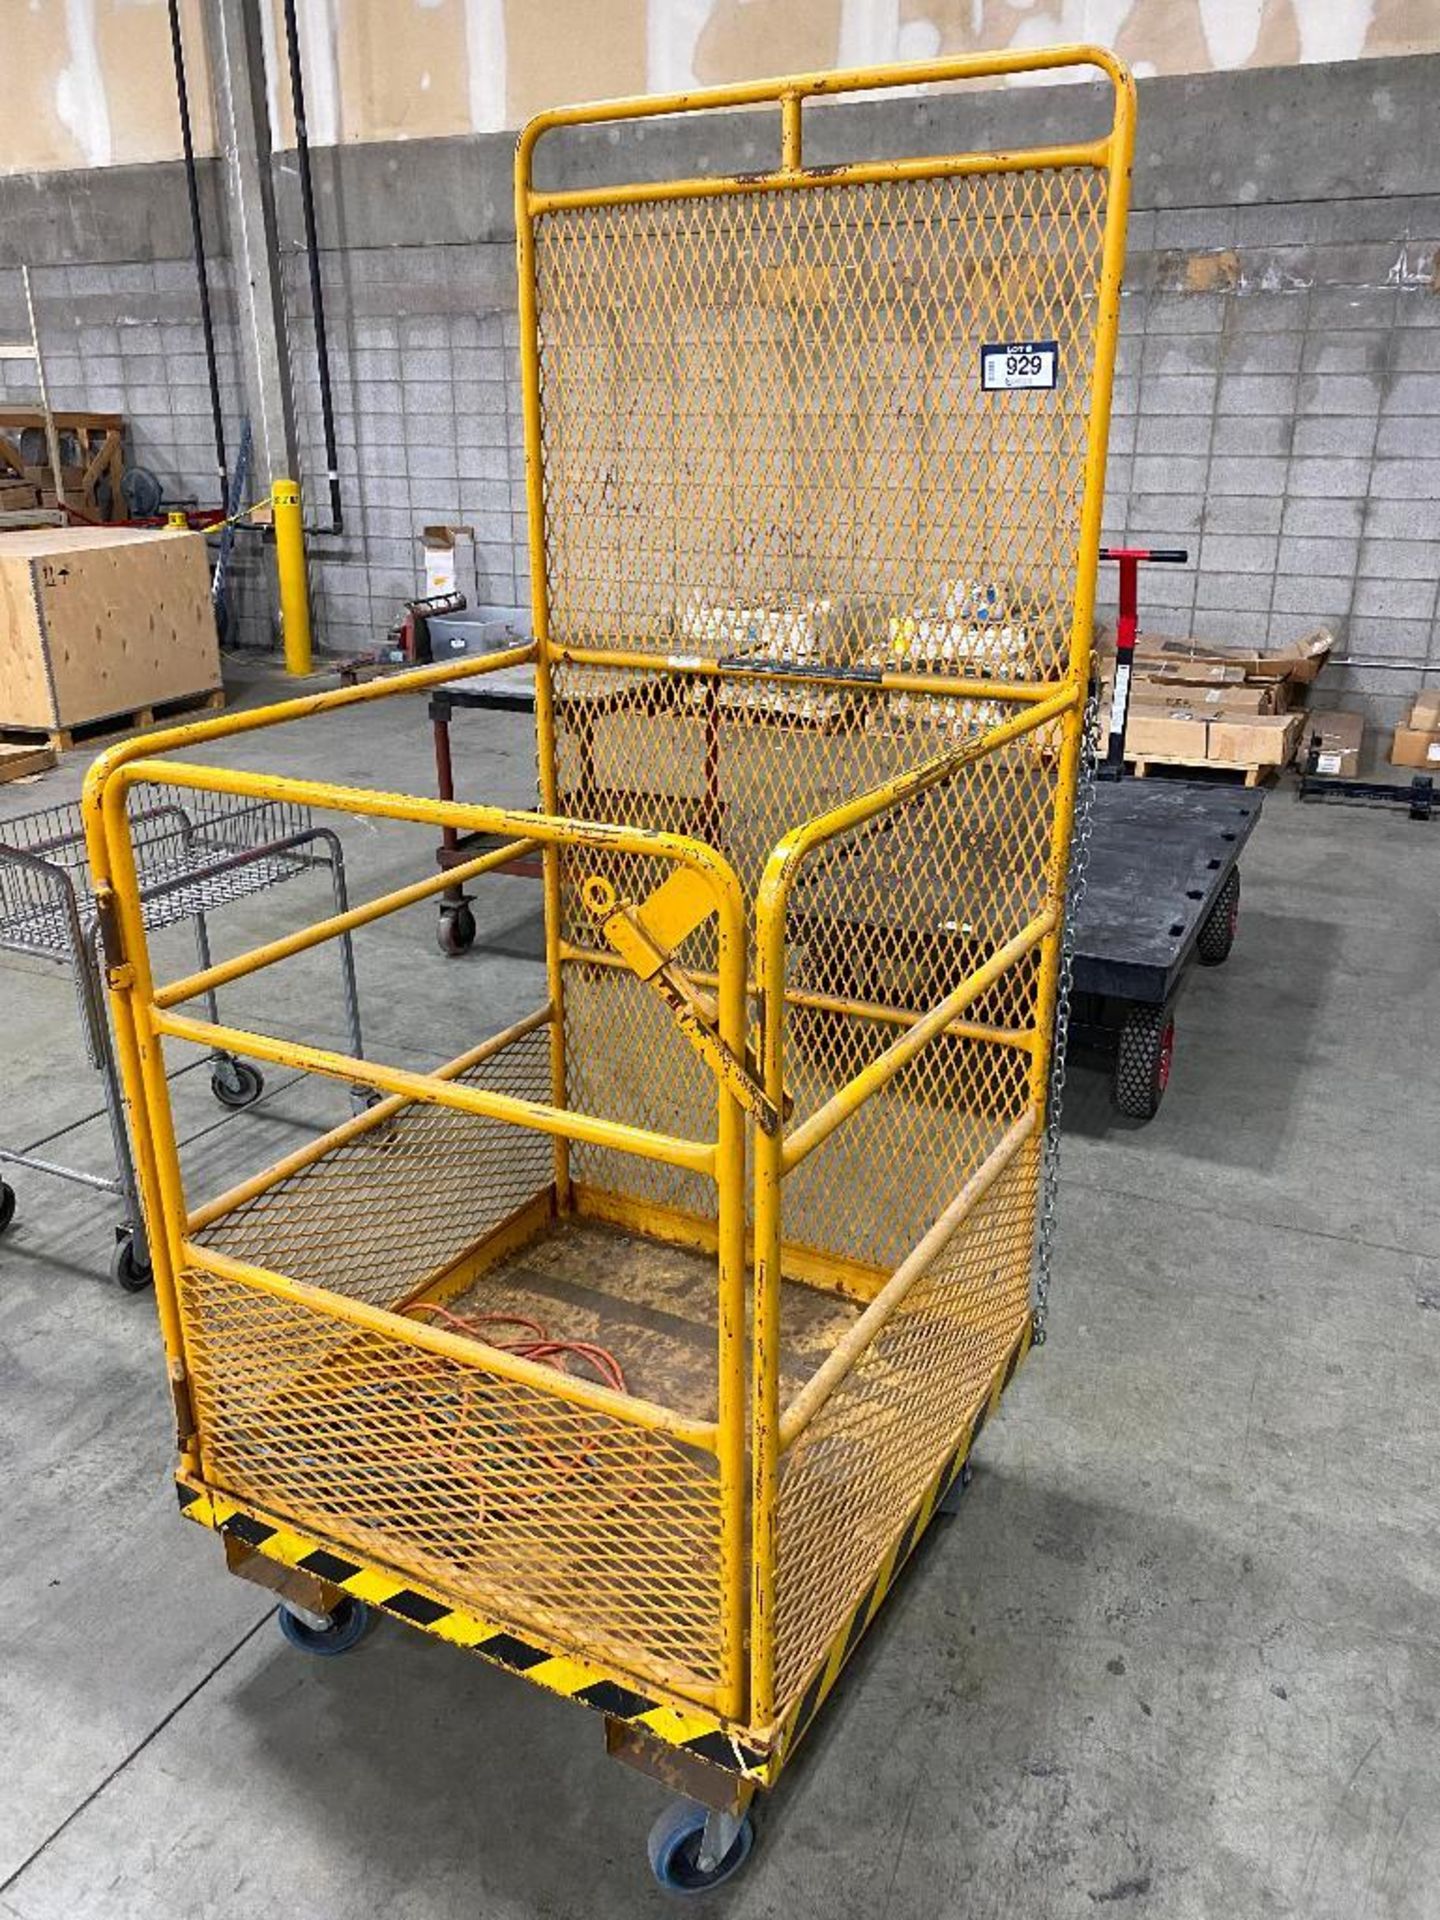 Shippers Supply 3636PF, 36" X36" Work Platform - Image 2 of 4